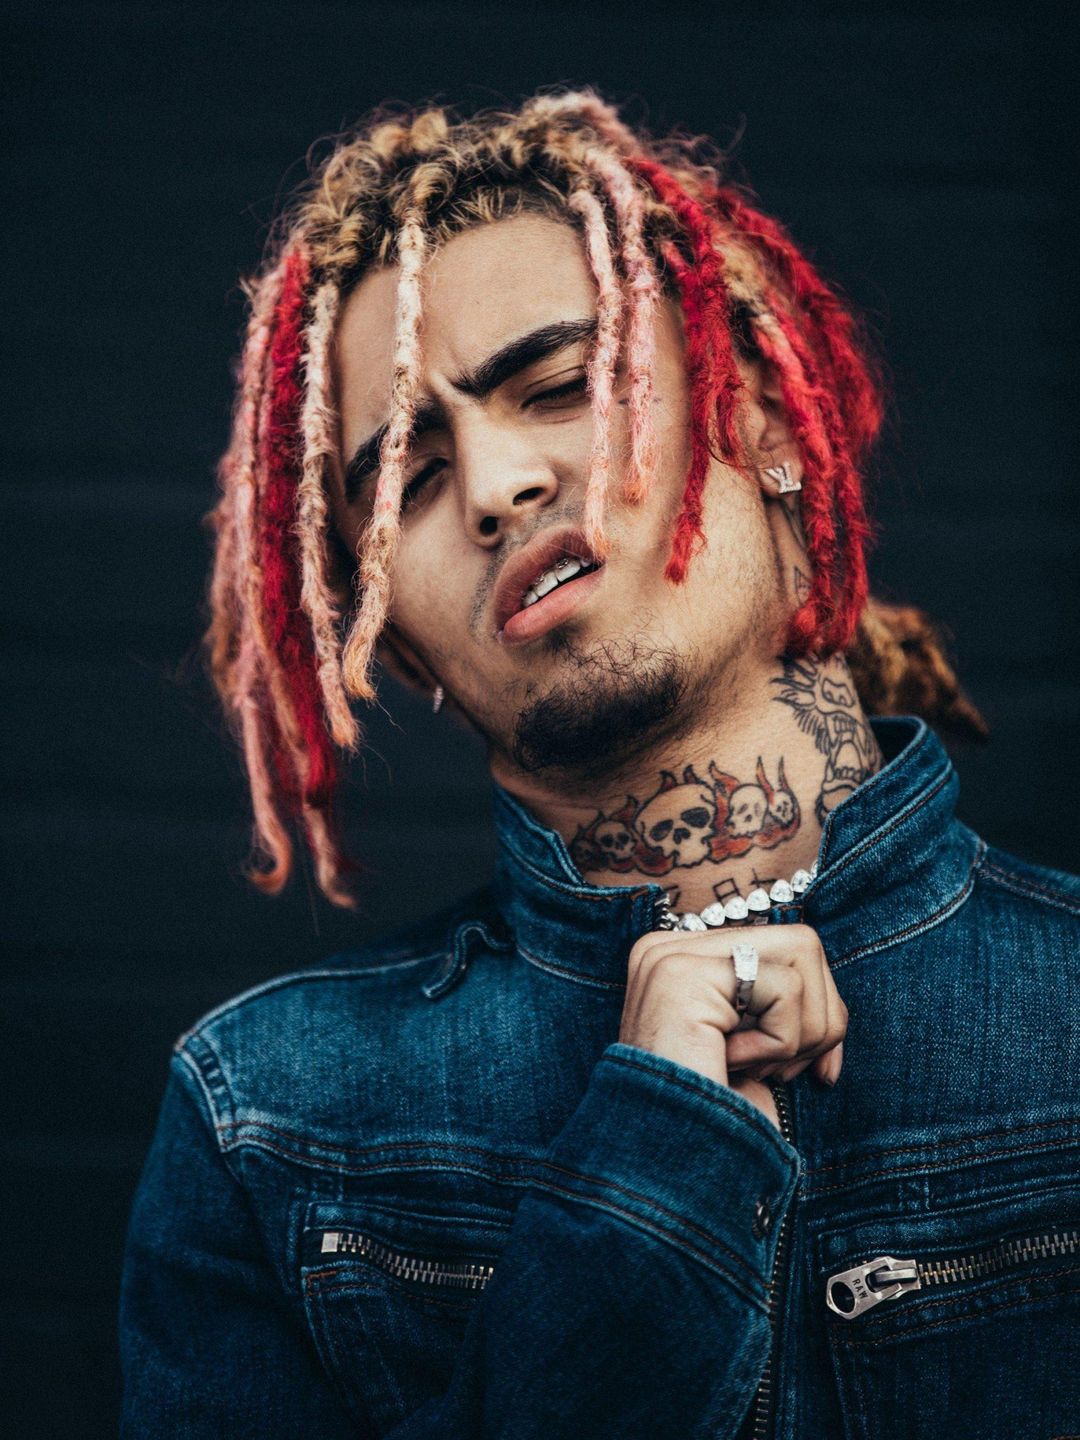 Lil Pump who is his mother